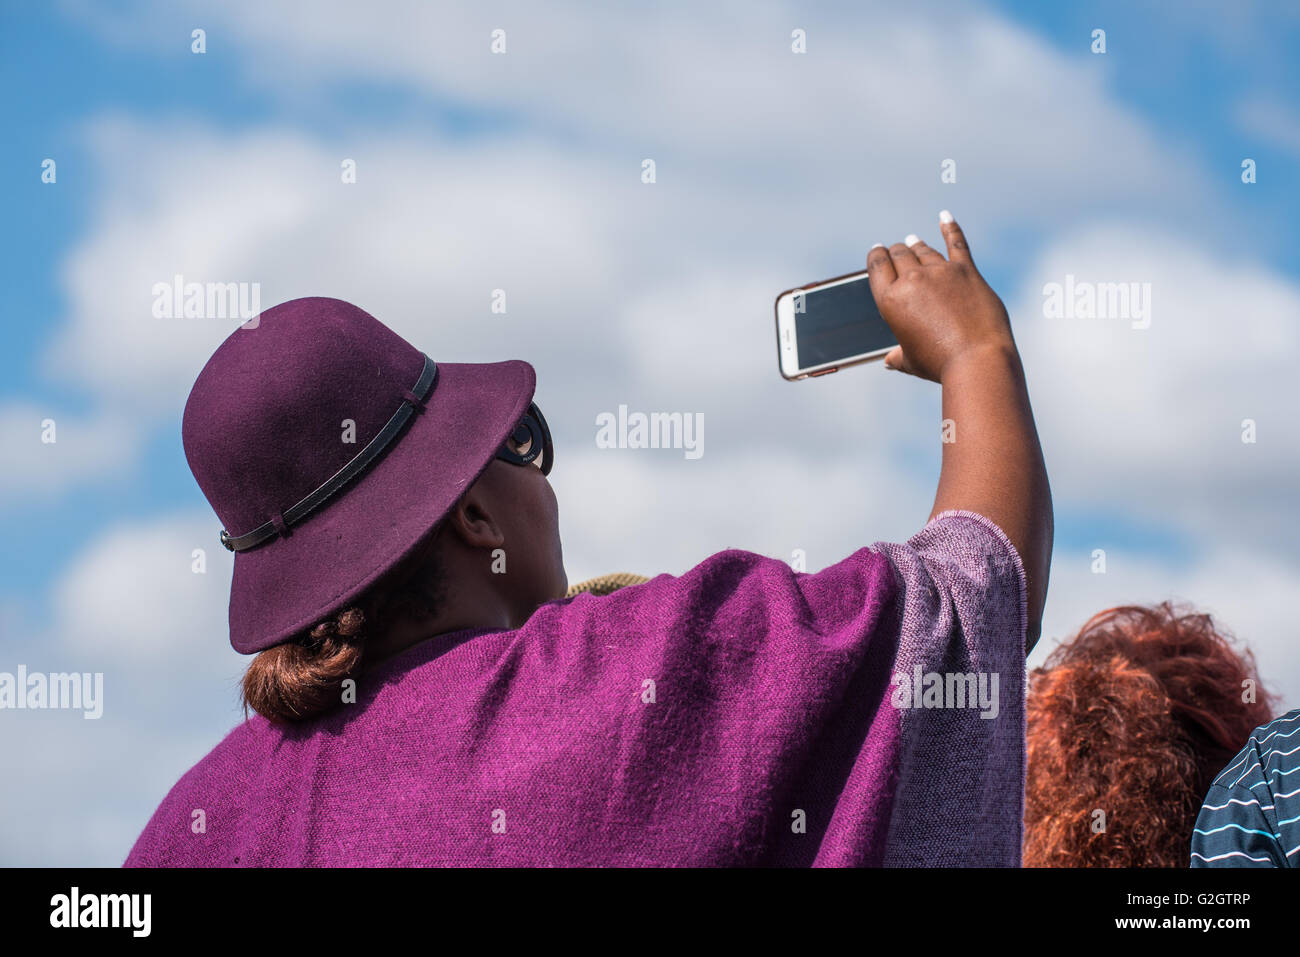 A spectator wearing a hat at the Lowveld Airshow taking a video with her cell phone Stock Photo